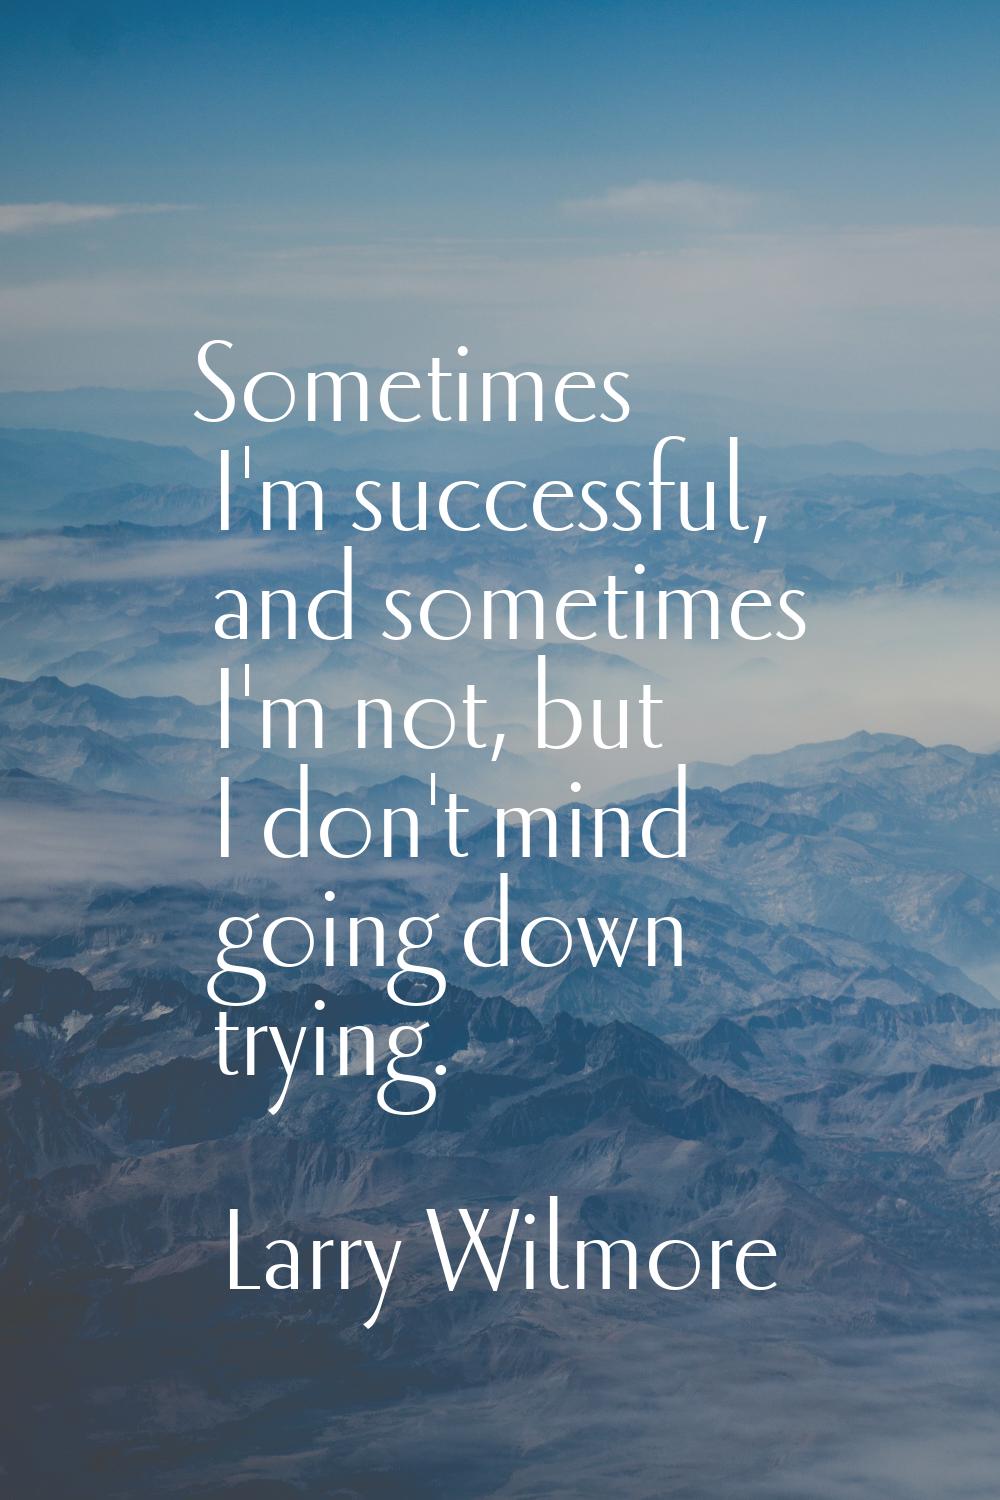 Sometimes I'm successful, and sometimes I'm not, but I don't mind going down trying.